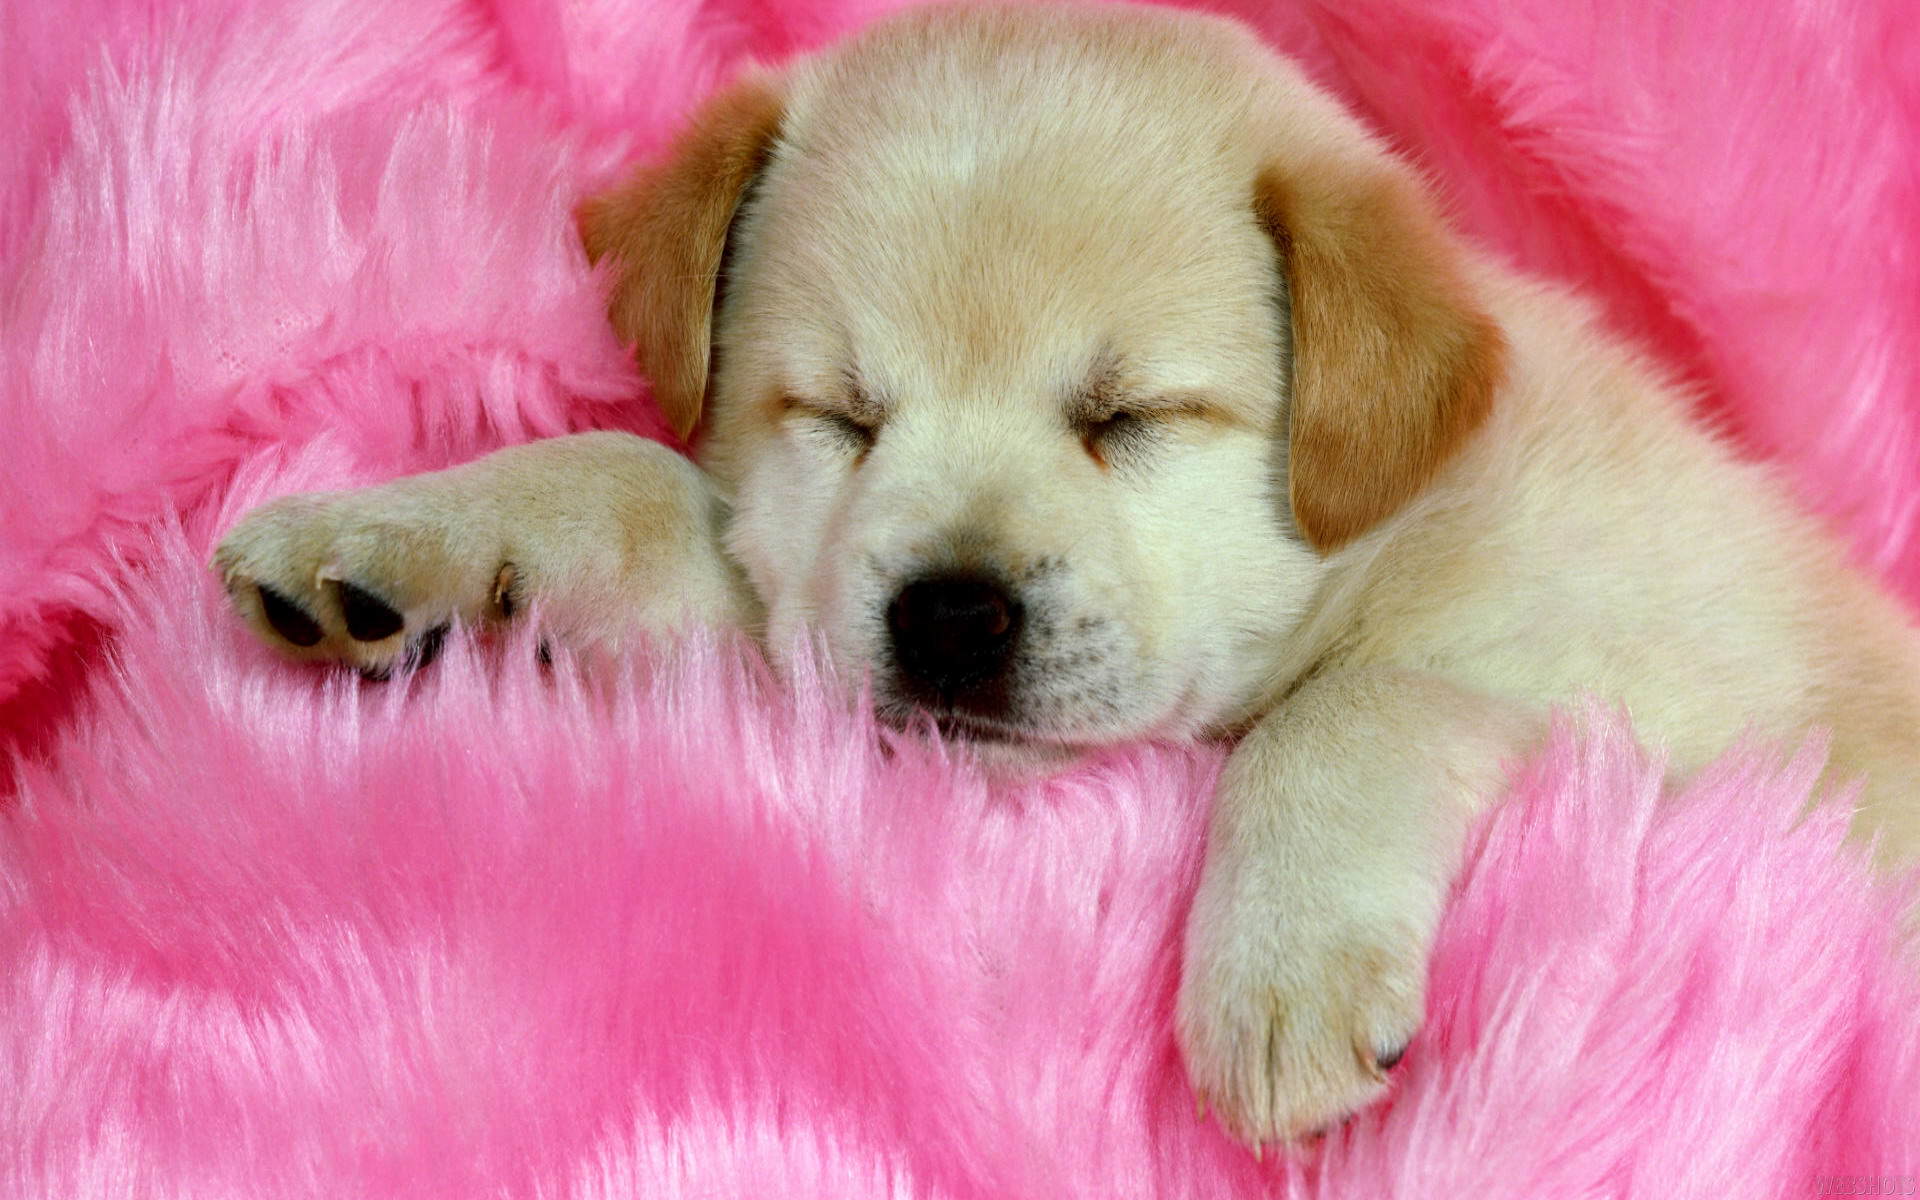 Puppy cute puppies photos free download – Widescreen Wallpaper